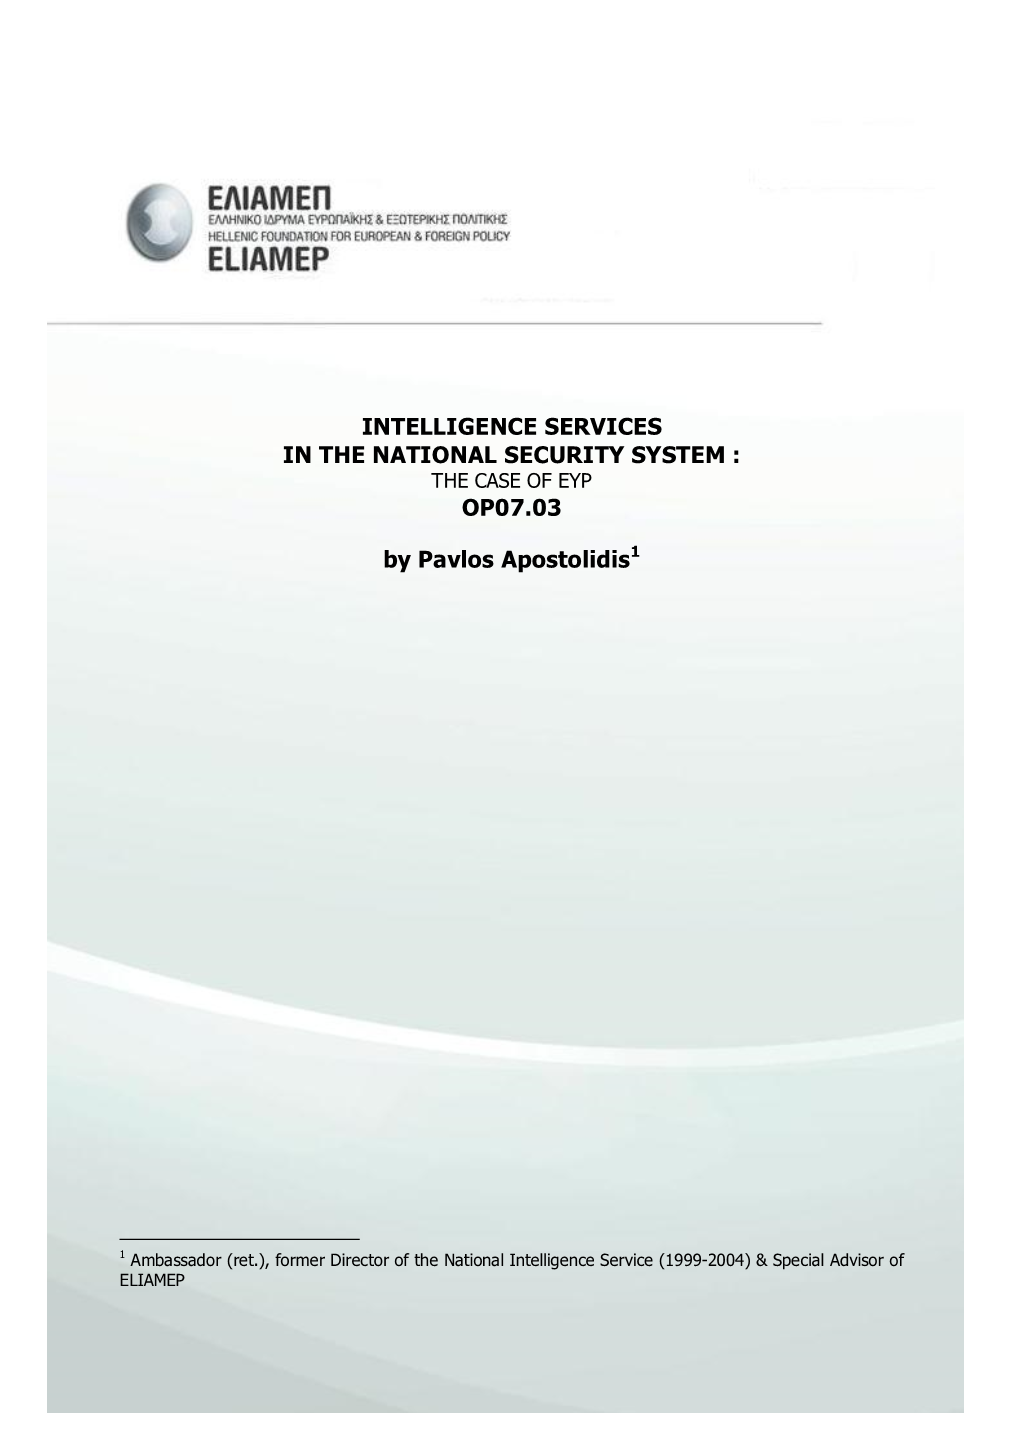 Intelligence Services in the National Security System: the Case Of